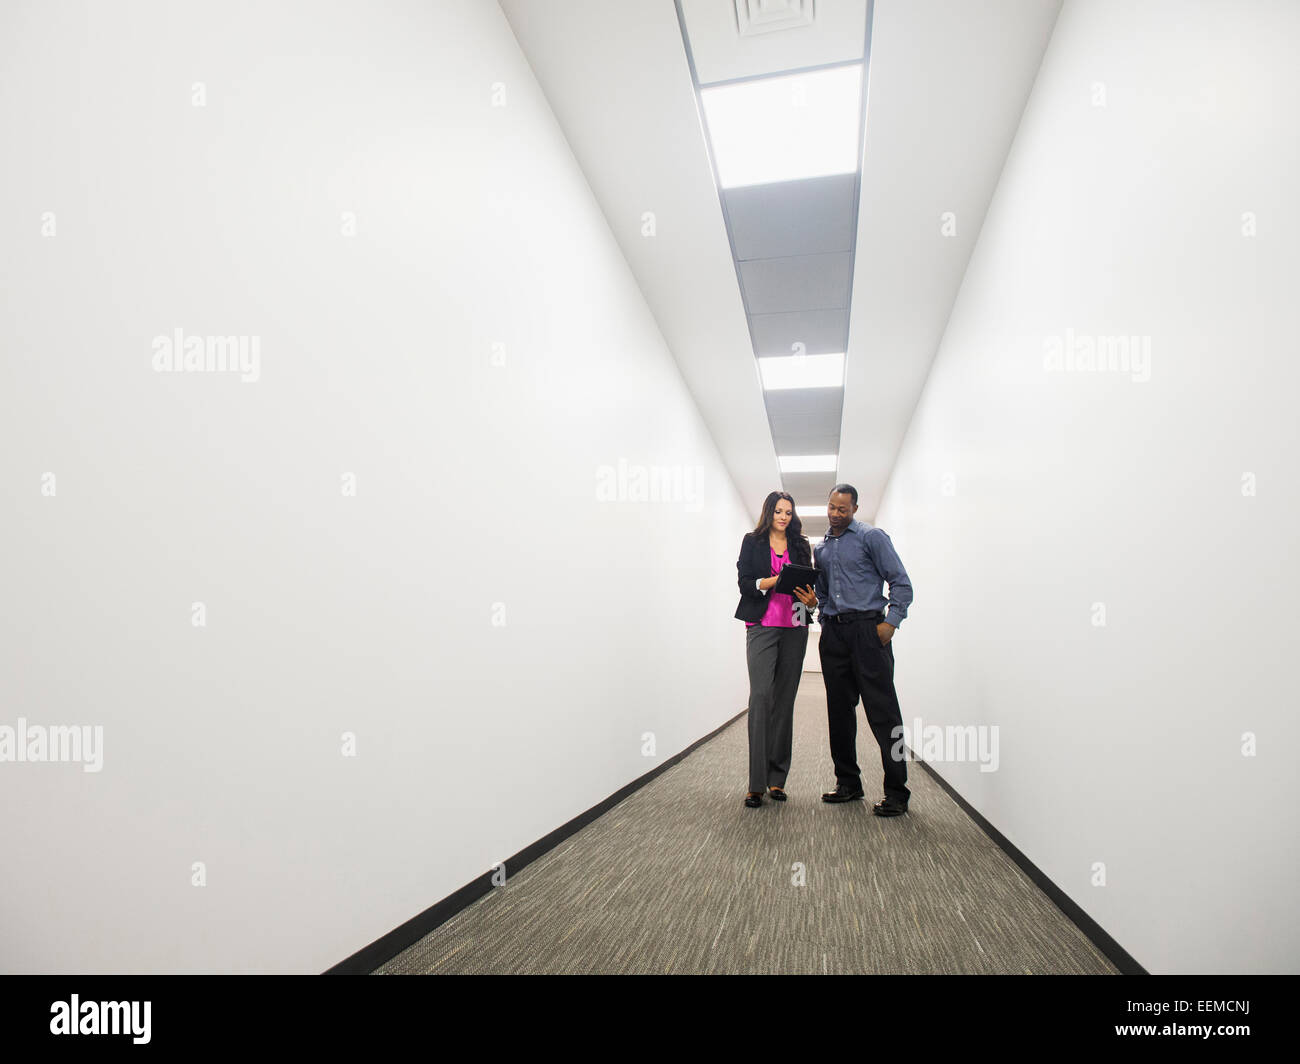 Business people talking in office corridor Banque D'Images